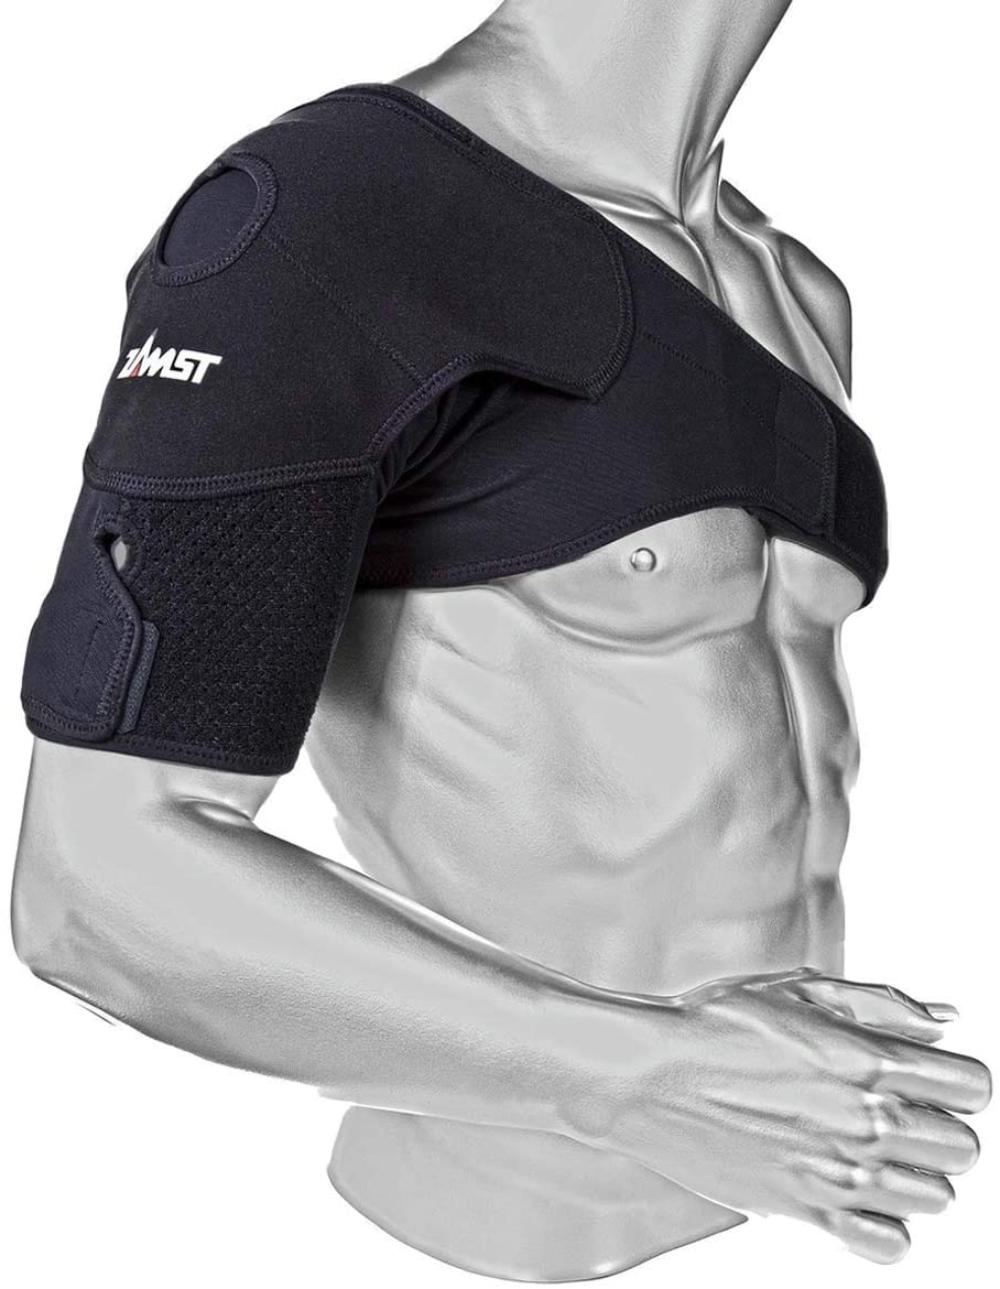 Zamst Compression Arm Sleeves 2 pack New